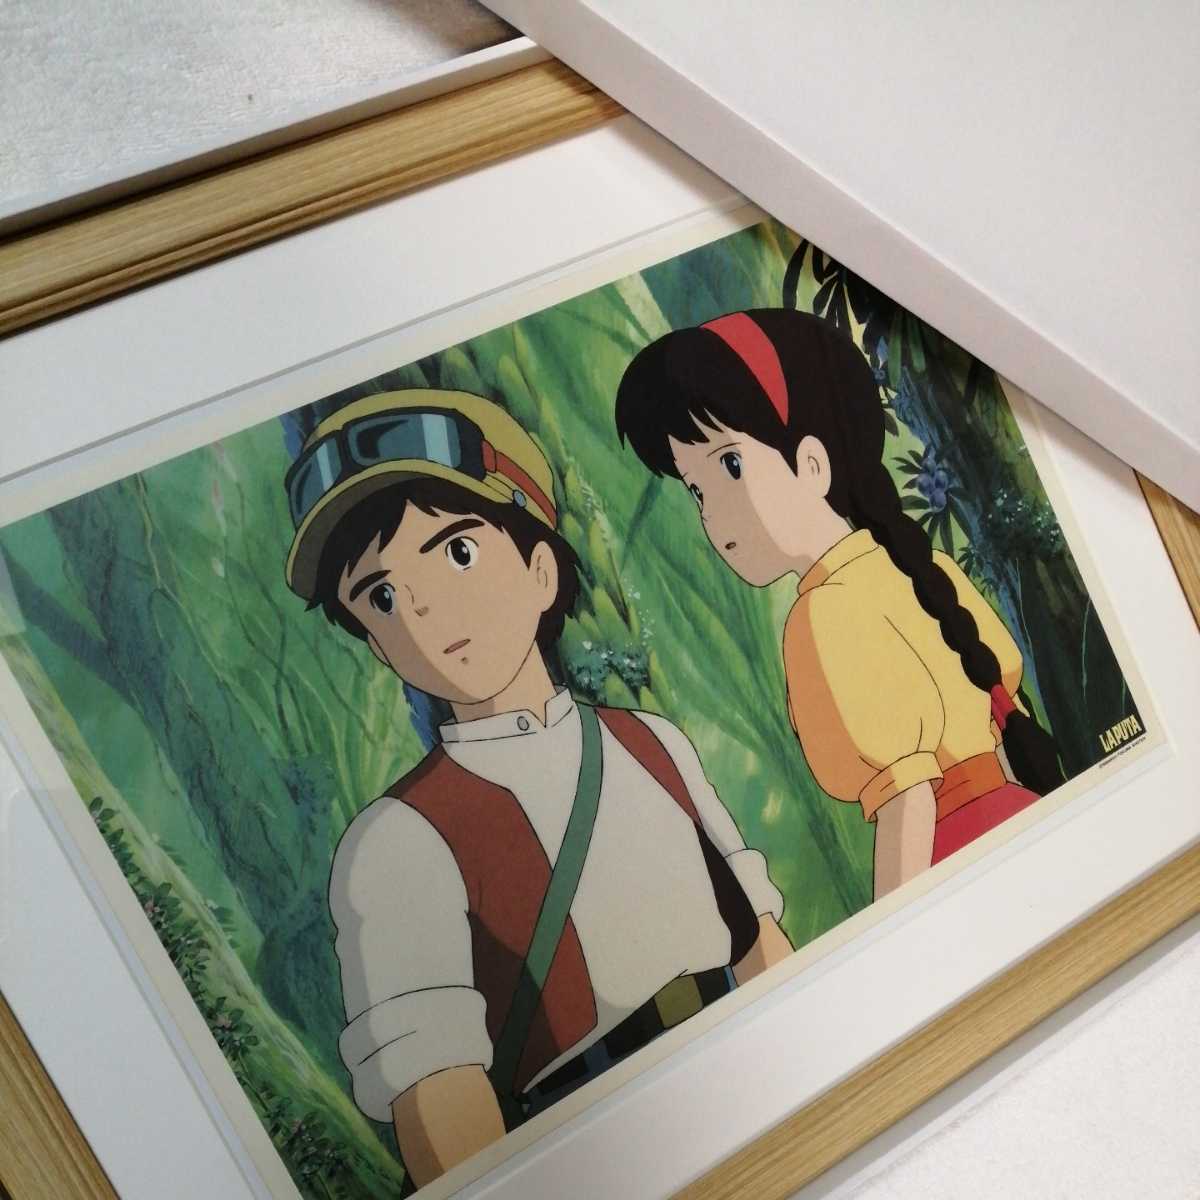 More than 30 years ago [At that time] Studio Ghibli Castle in the Sky [Framed item] Poster, wall hanging painting, original reproduction, inspection) cel, postcard, Hayao Miyazaki d, comics, anime goods, others